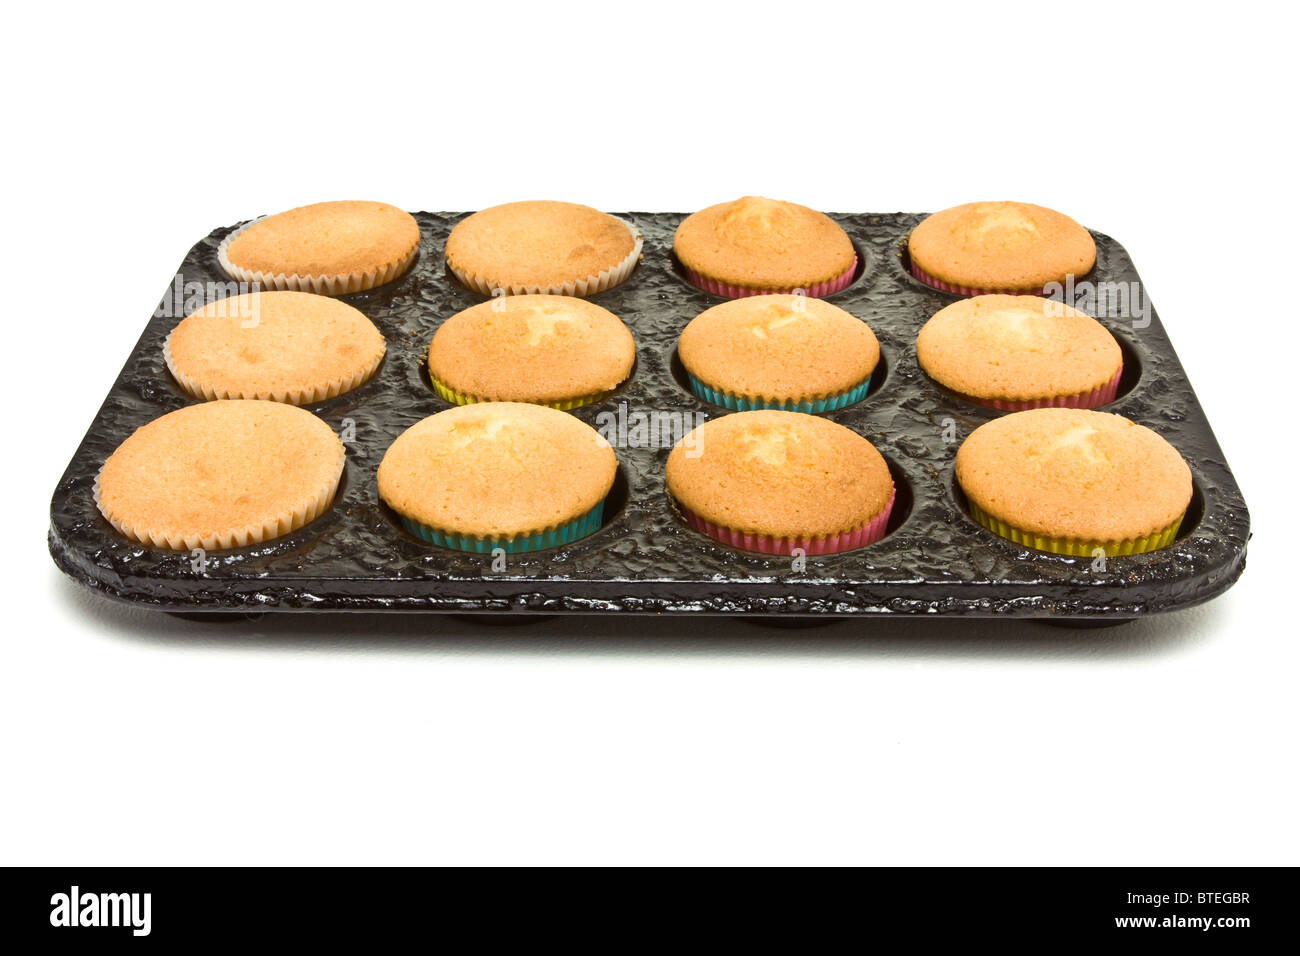 Freshly baked cup cakes still in baking tray straight from the oven on white. Stock Photo